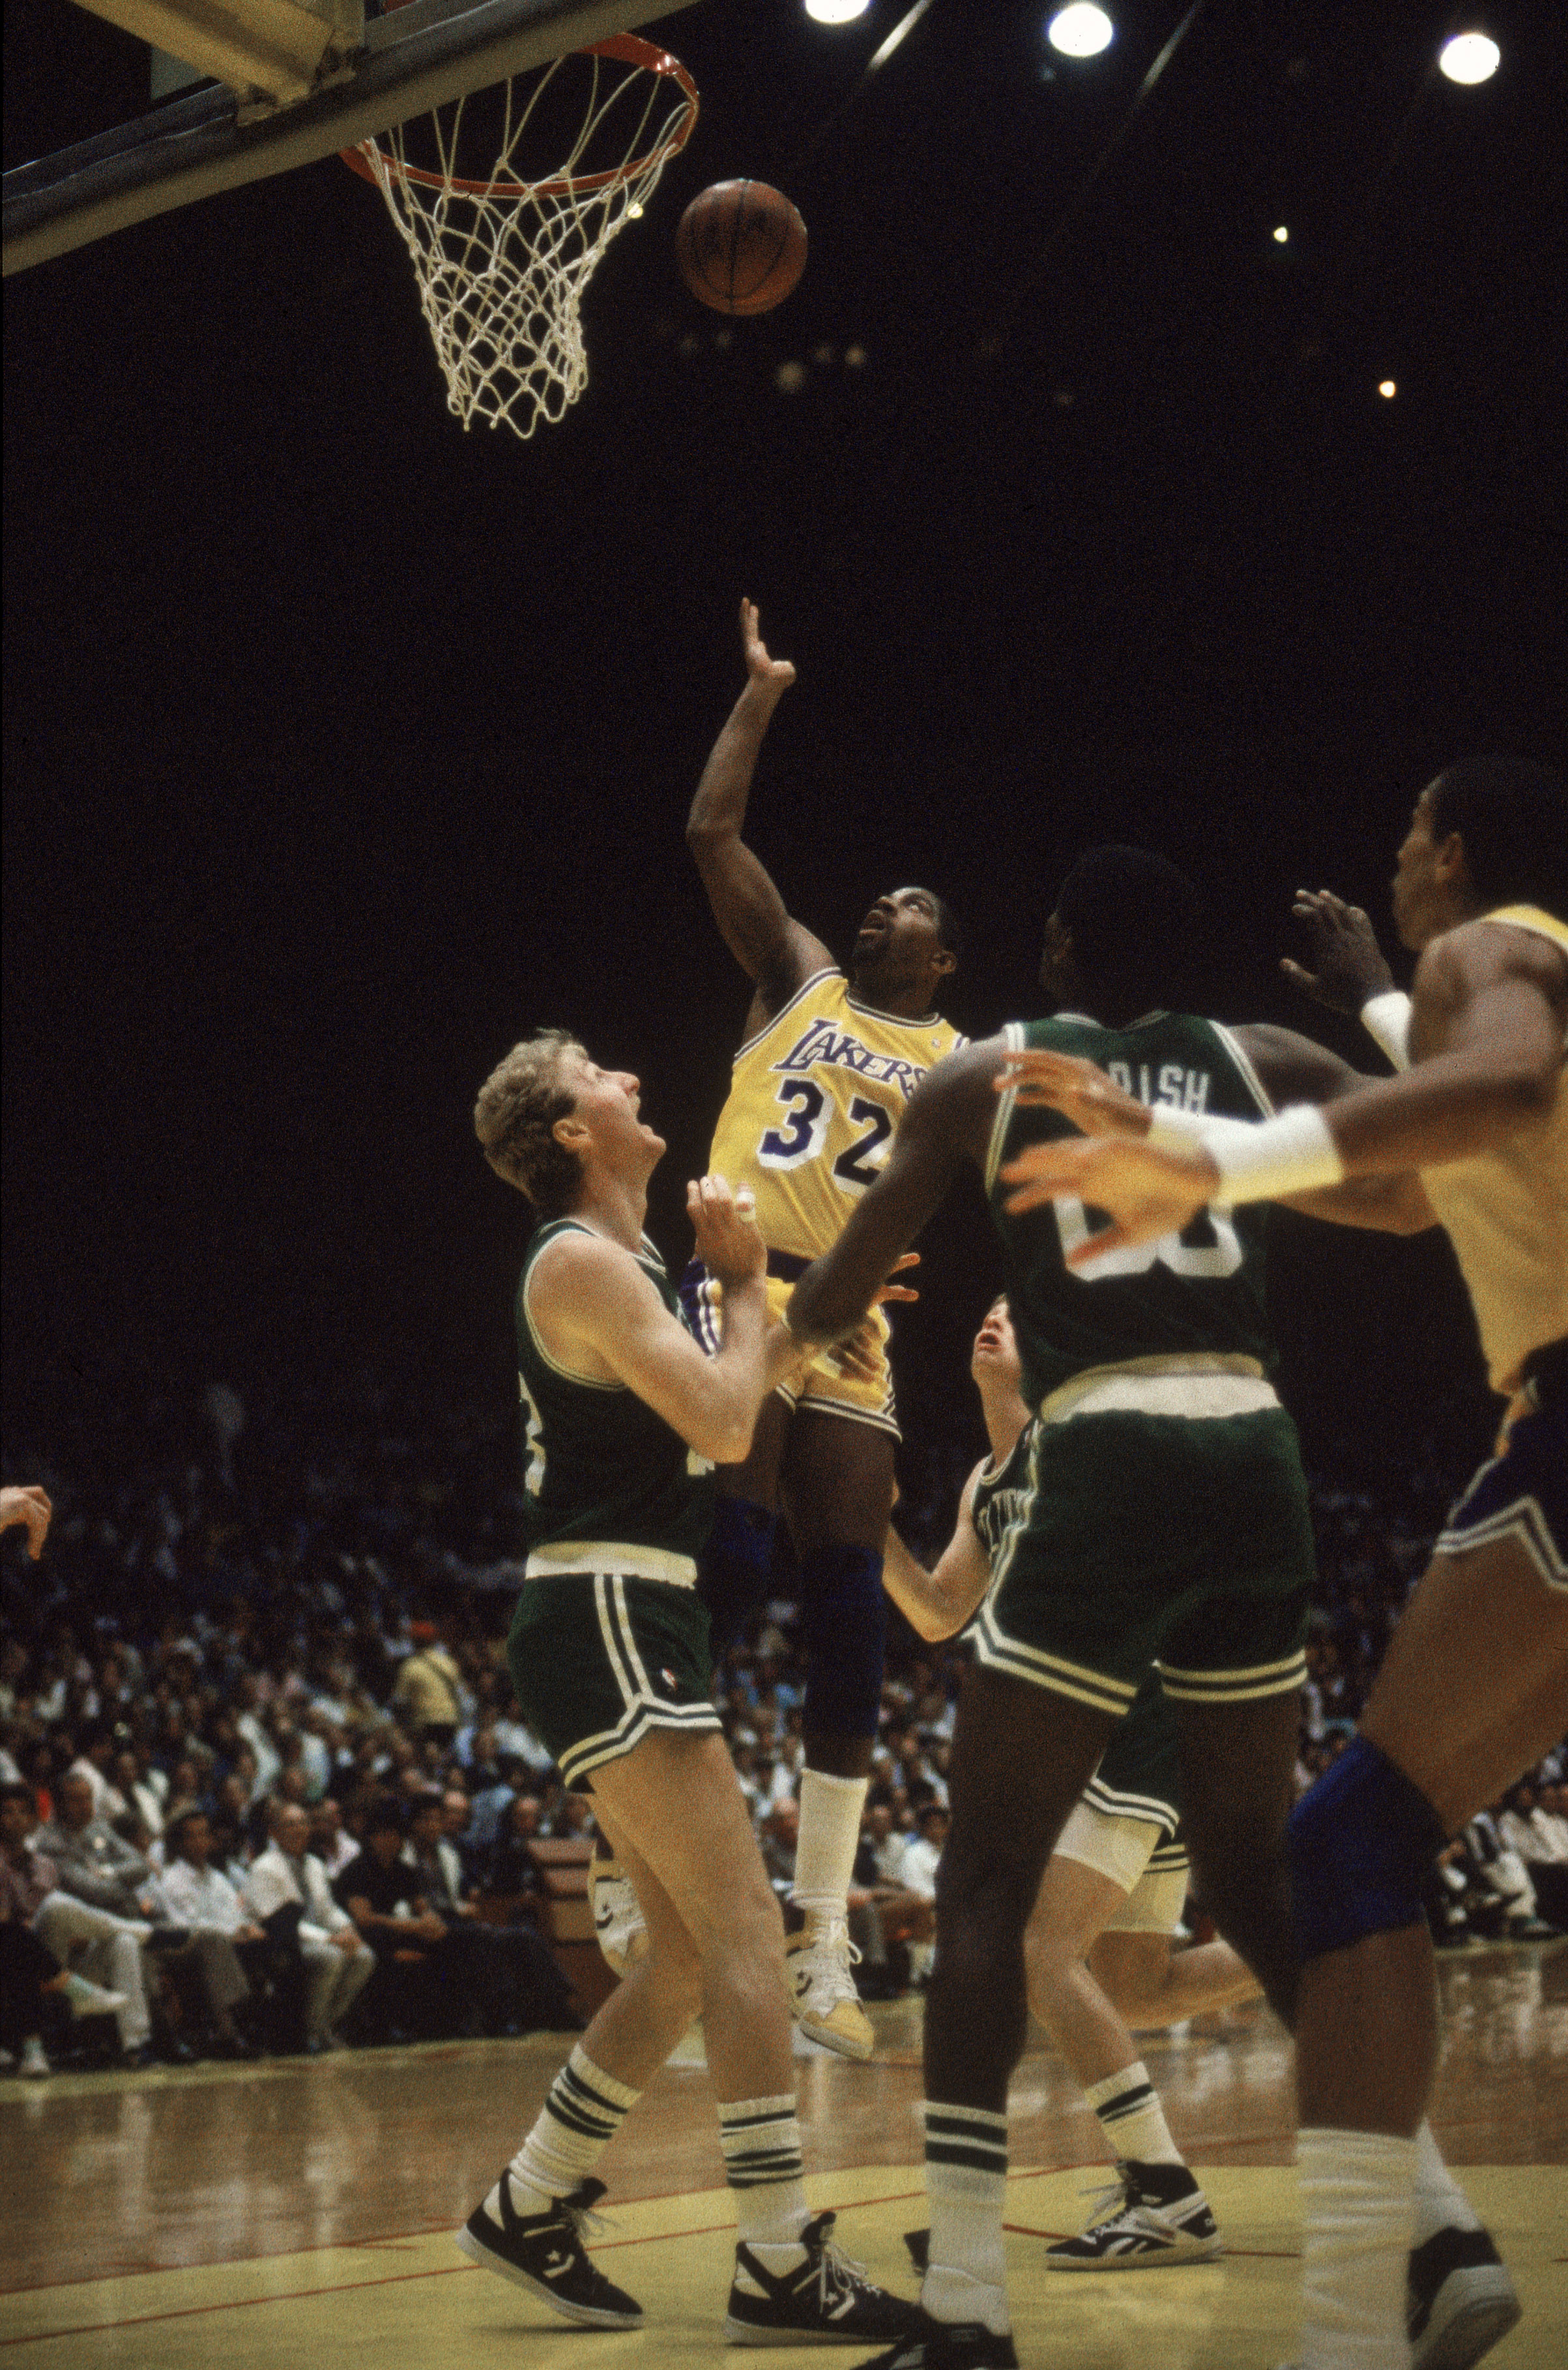 The Magical Season 1971-72 Los Angeles Lakers by Dr. Elliott